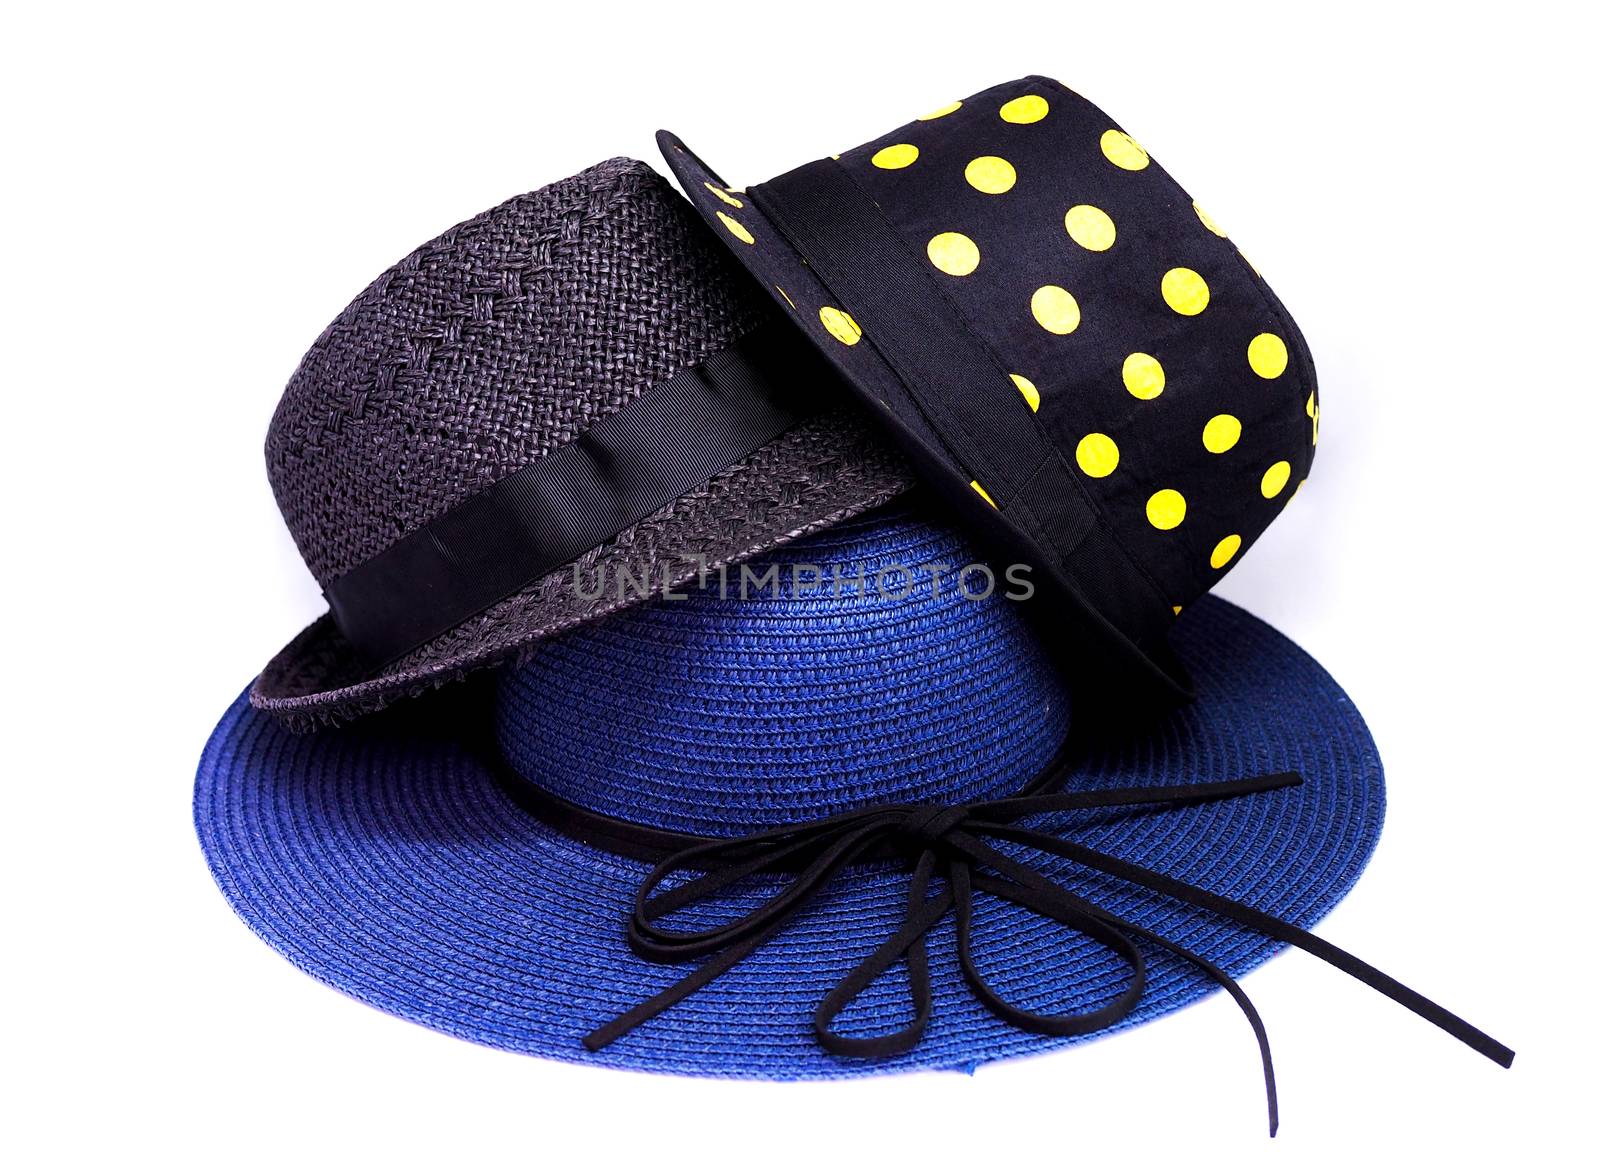 Three fashion hats stacked. Women's blue hat and 2 black men's h by kittima05